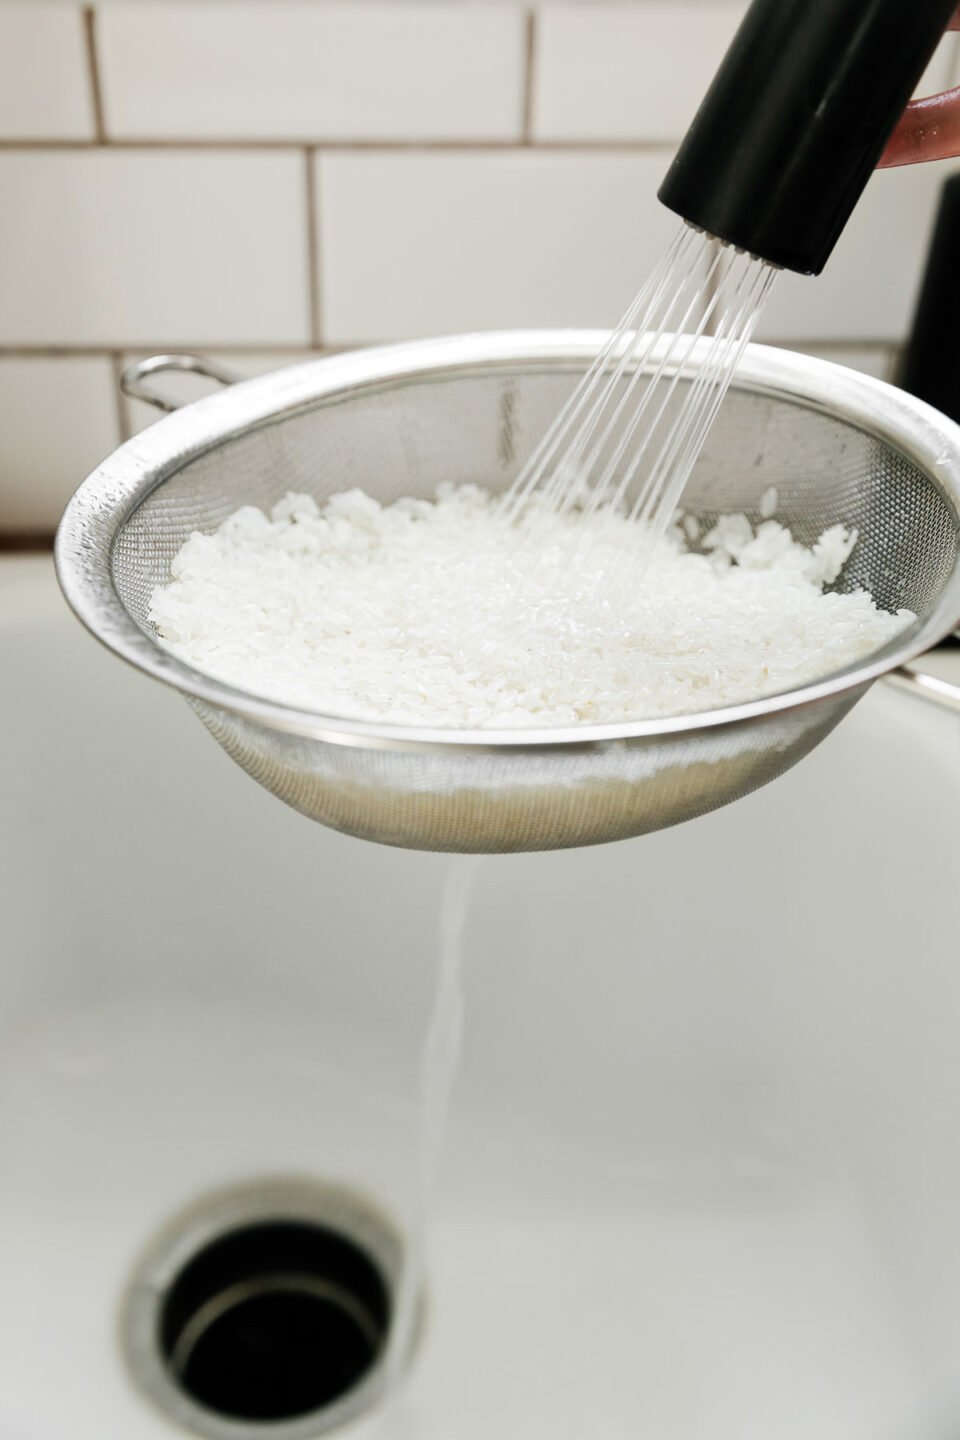 White rice fills a fine mesh colander while being rinsed well underneath a stream of water from a faucet as it is held over a sink. The water drains into the sink below. A white subway tile is seen in the background.